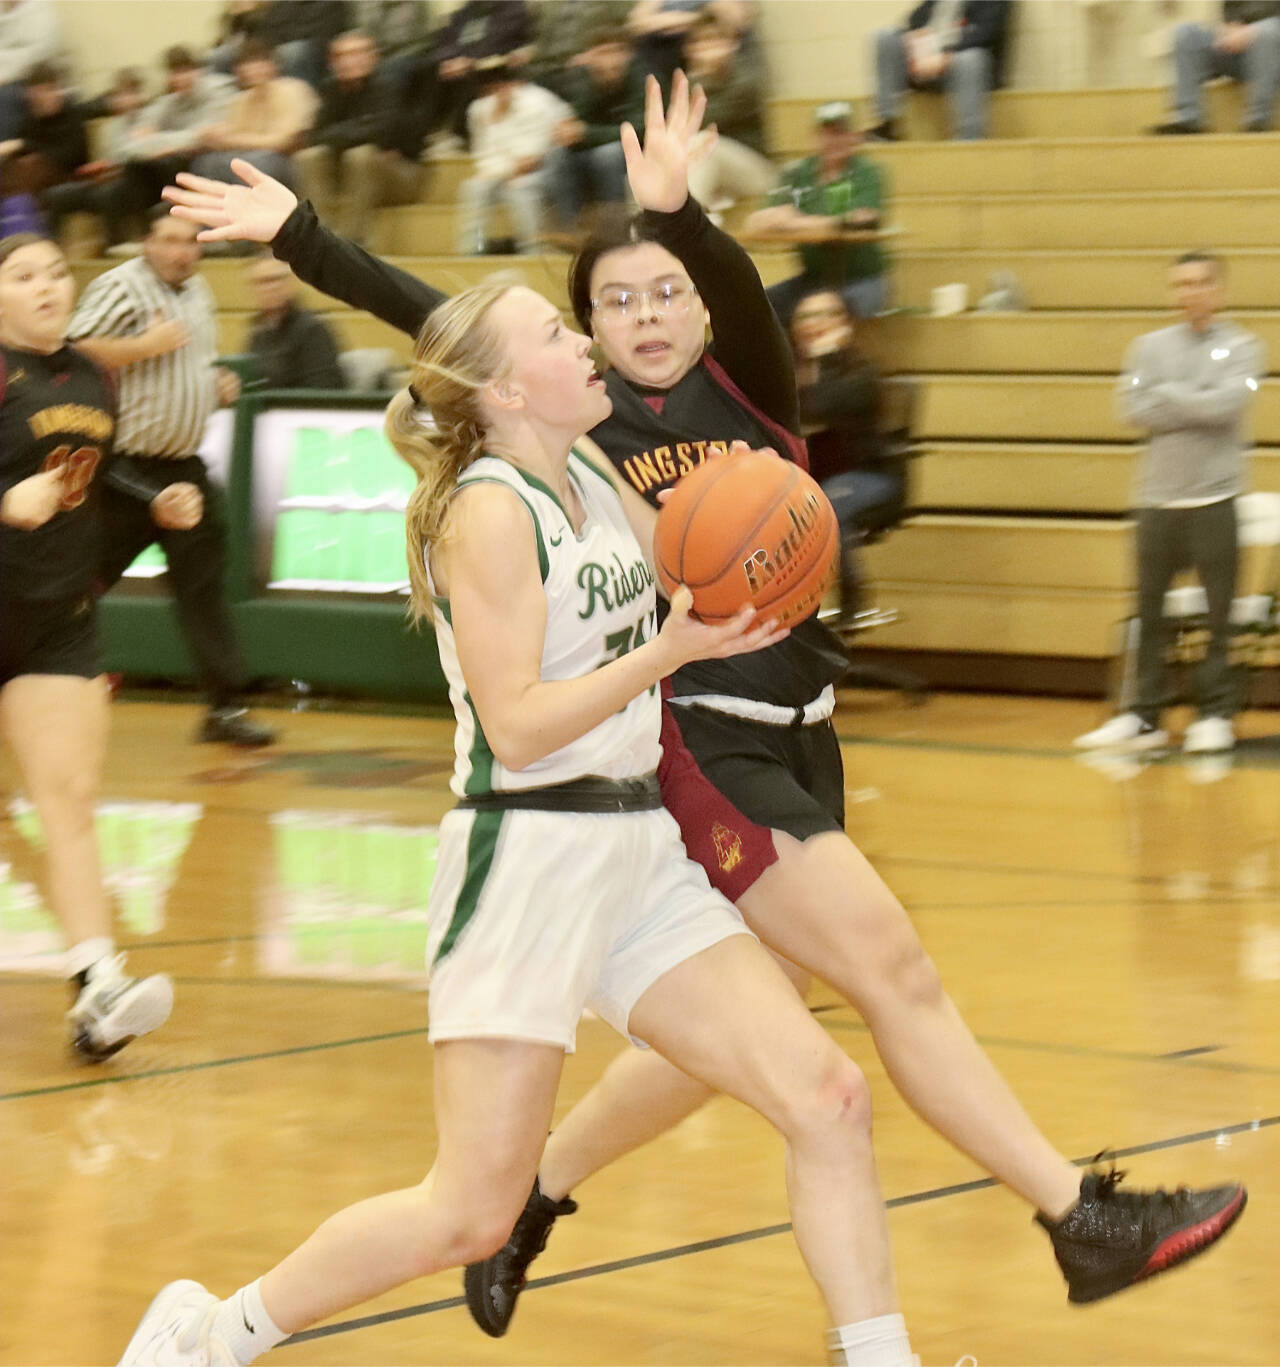 Port Angeles’ Anna Petty goes around a Kingston defender in the Roughriders’ 55-25 win at home Tuesday night. Petty scored 17 points to lead the Riders. (Dave Logan/for Peninsula Daily News)